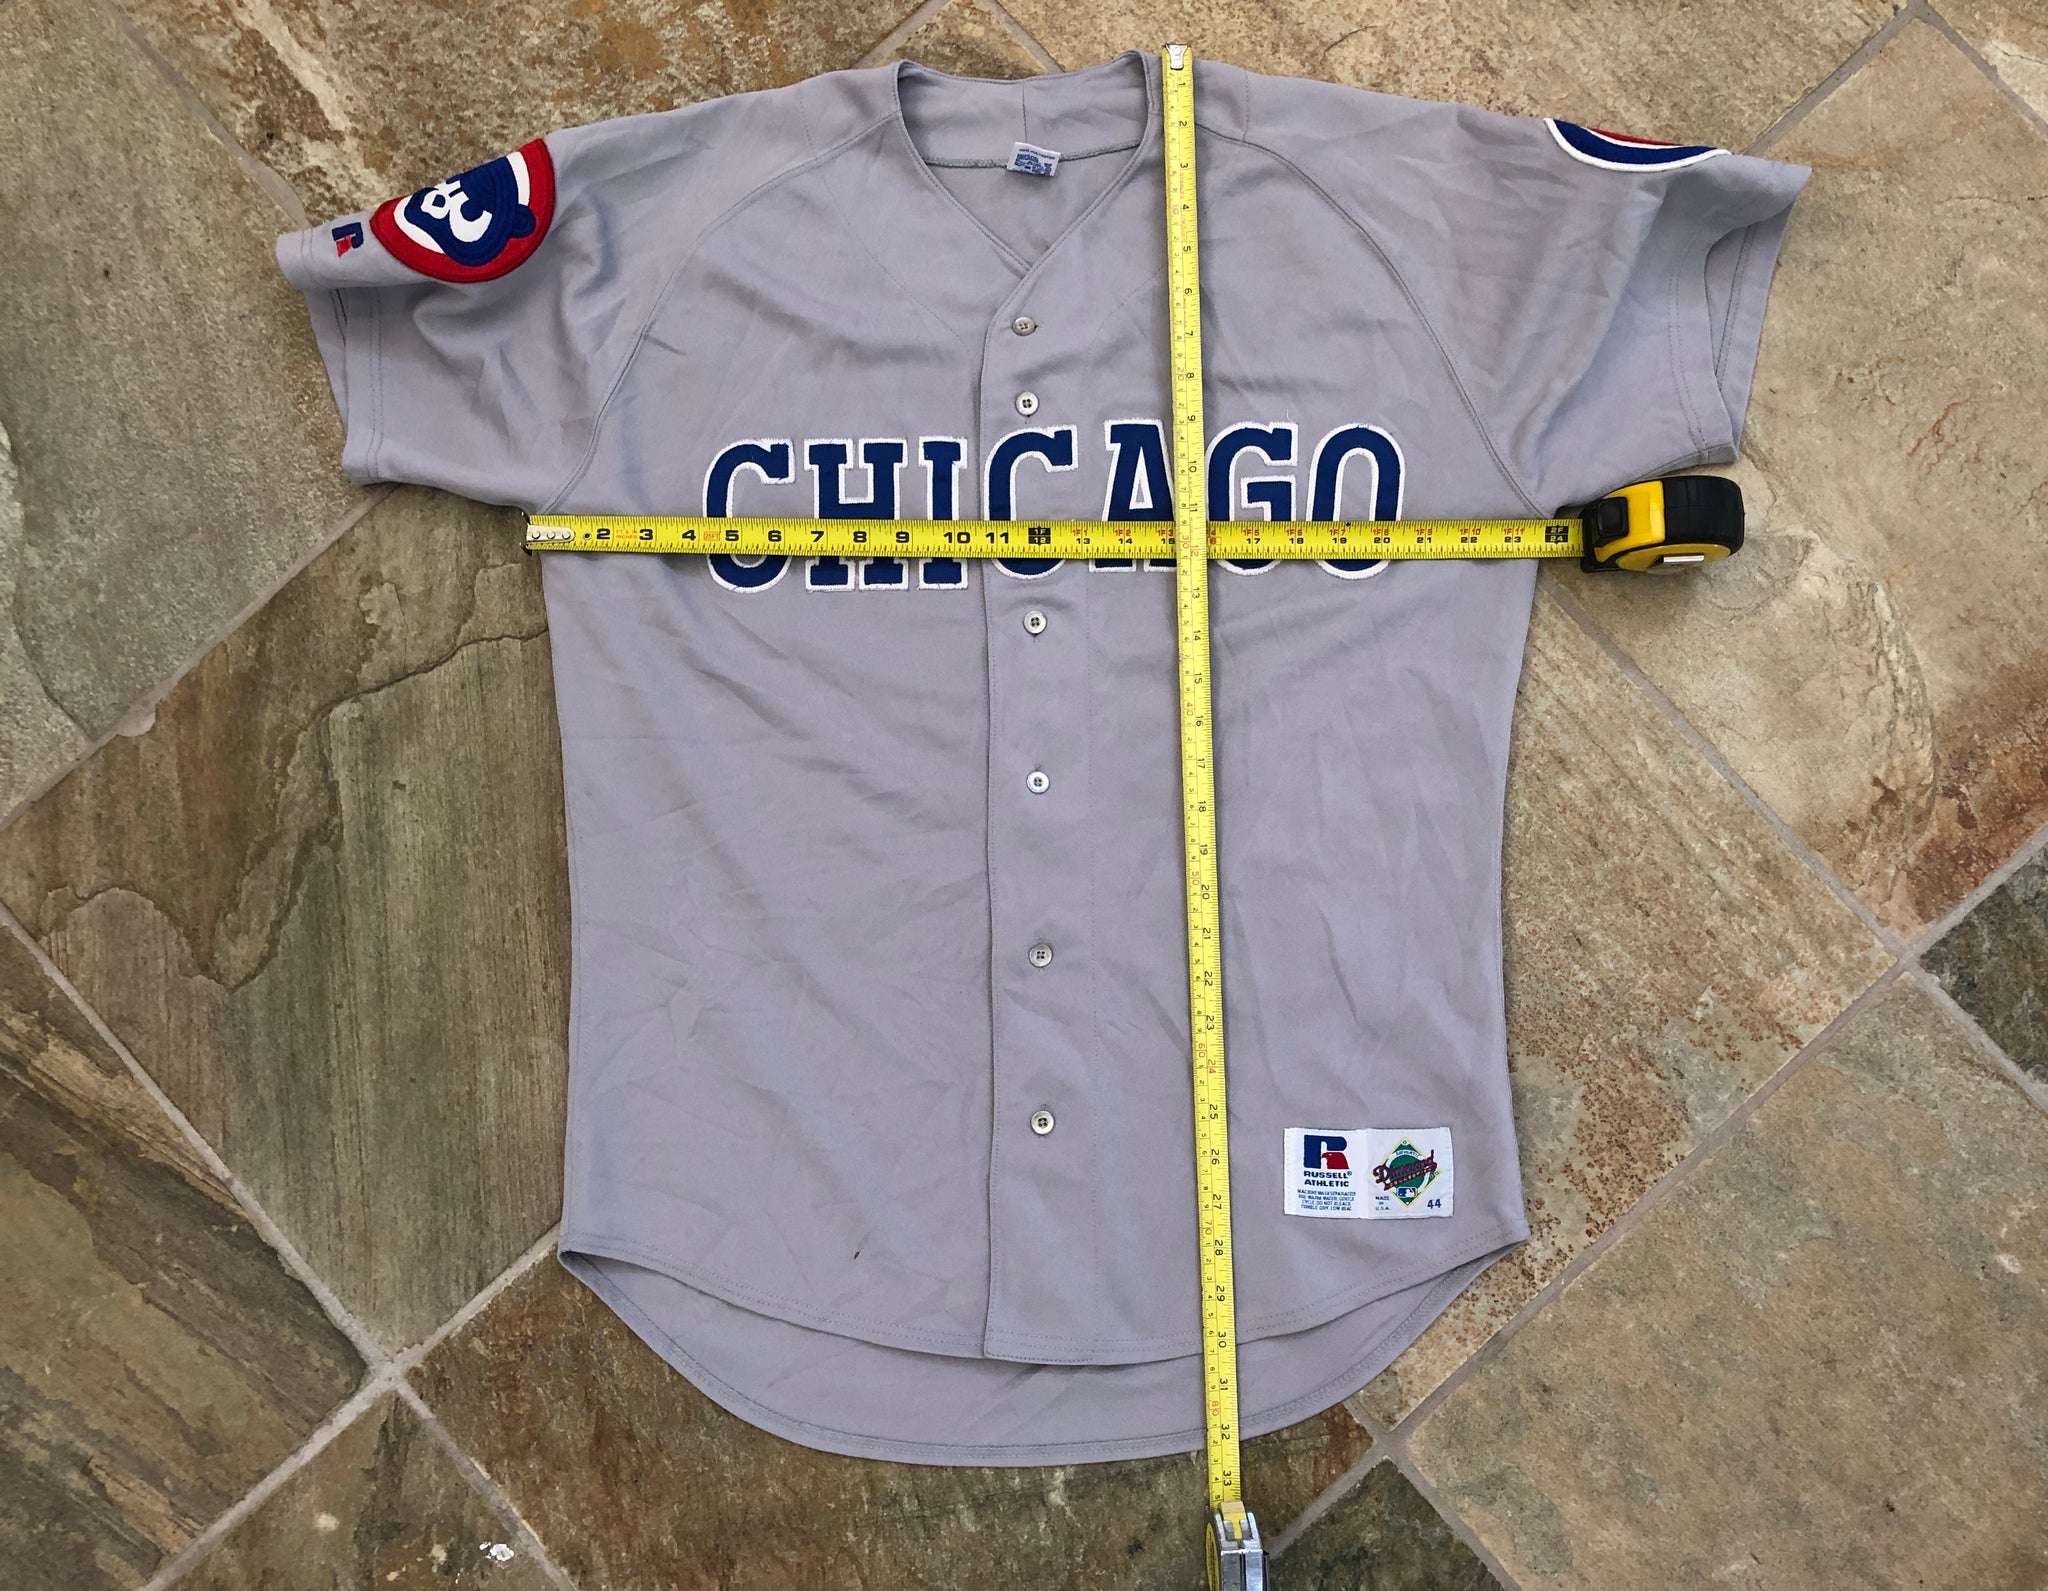 Original Authentic Russell Chicago Cubs Cuba Blank Road Jersey 48